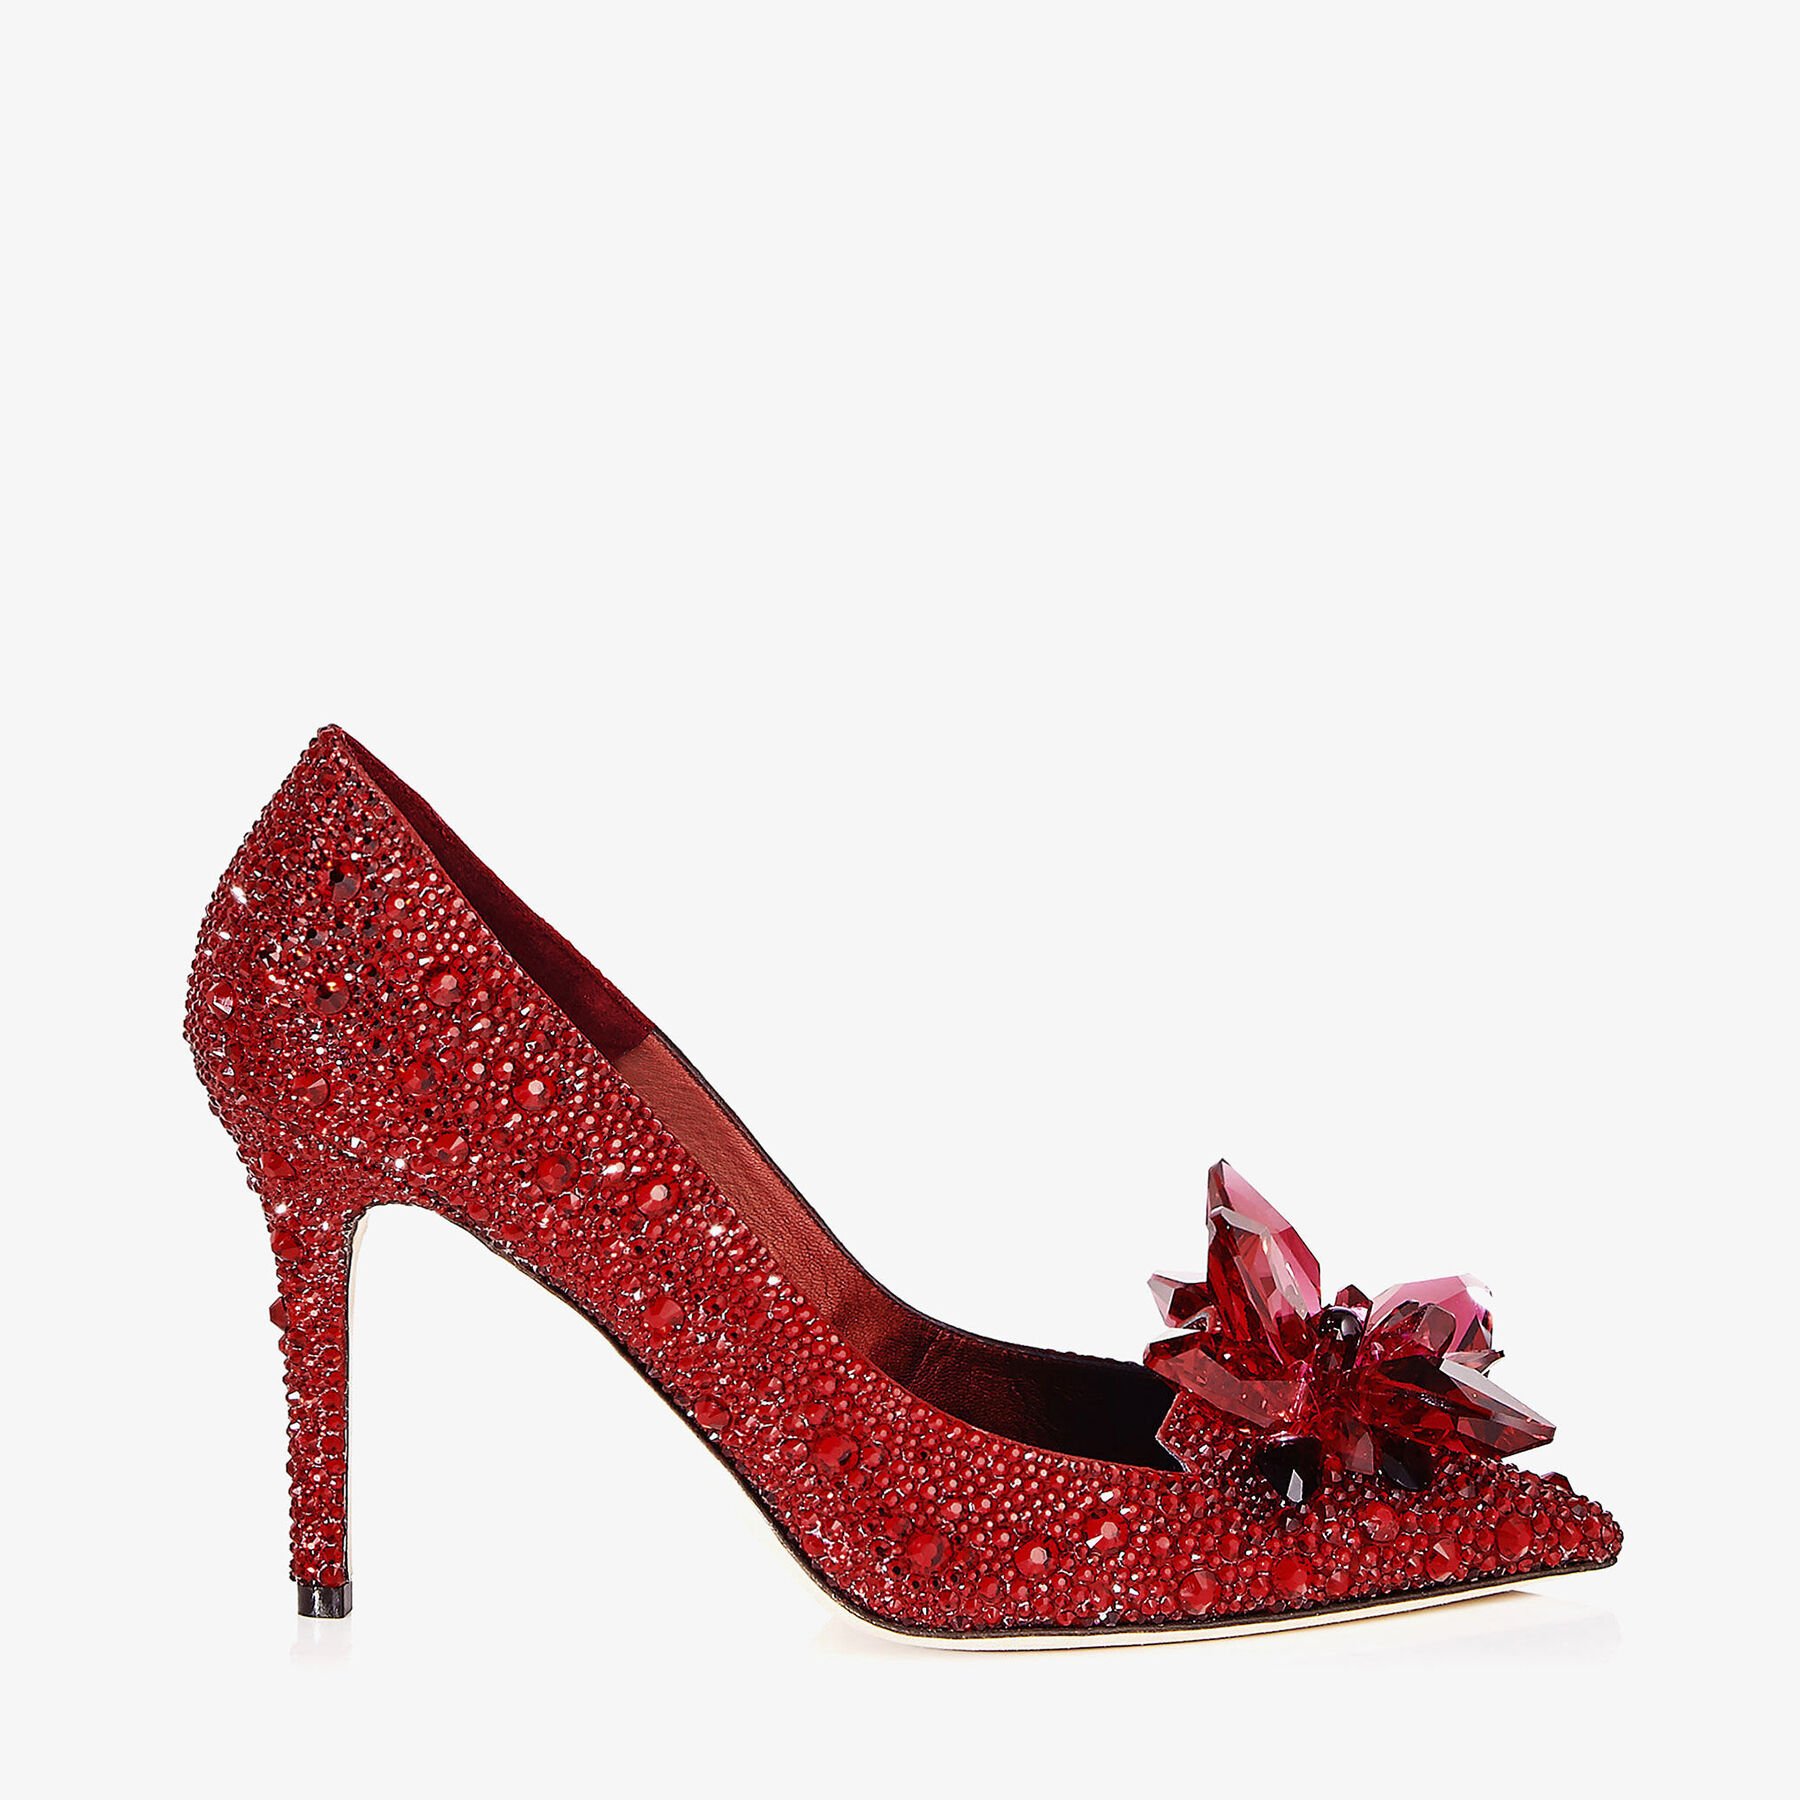 Red Crystal Covered Pointy Toe Pumps, Alia, Pre Fall 18